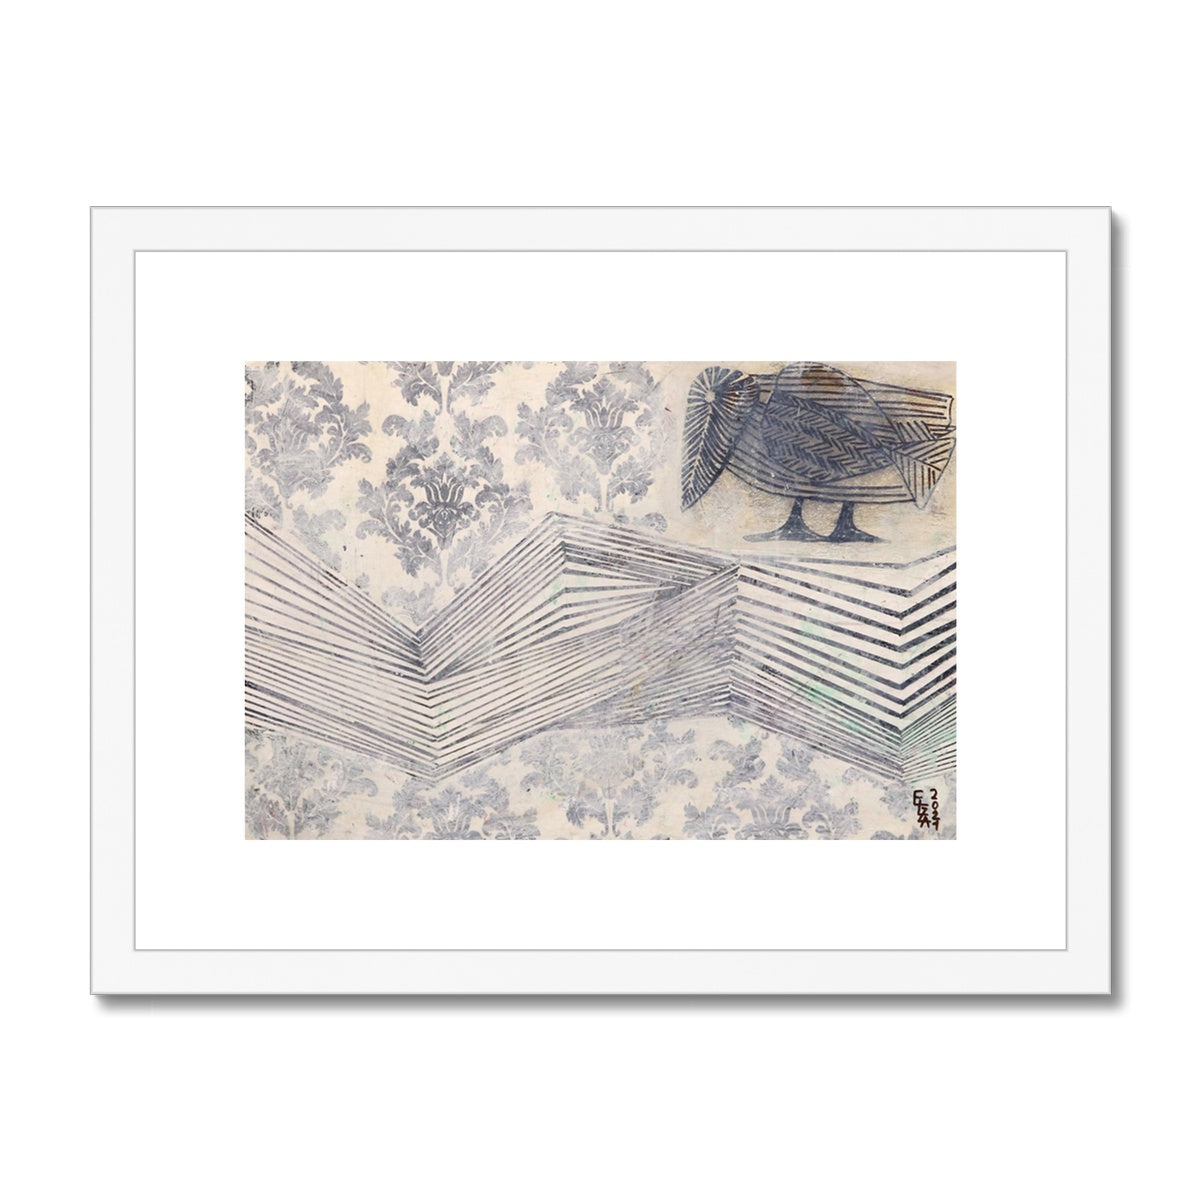 Reflective Series 1, Framed & Mounted Print